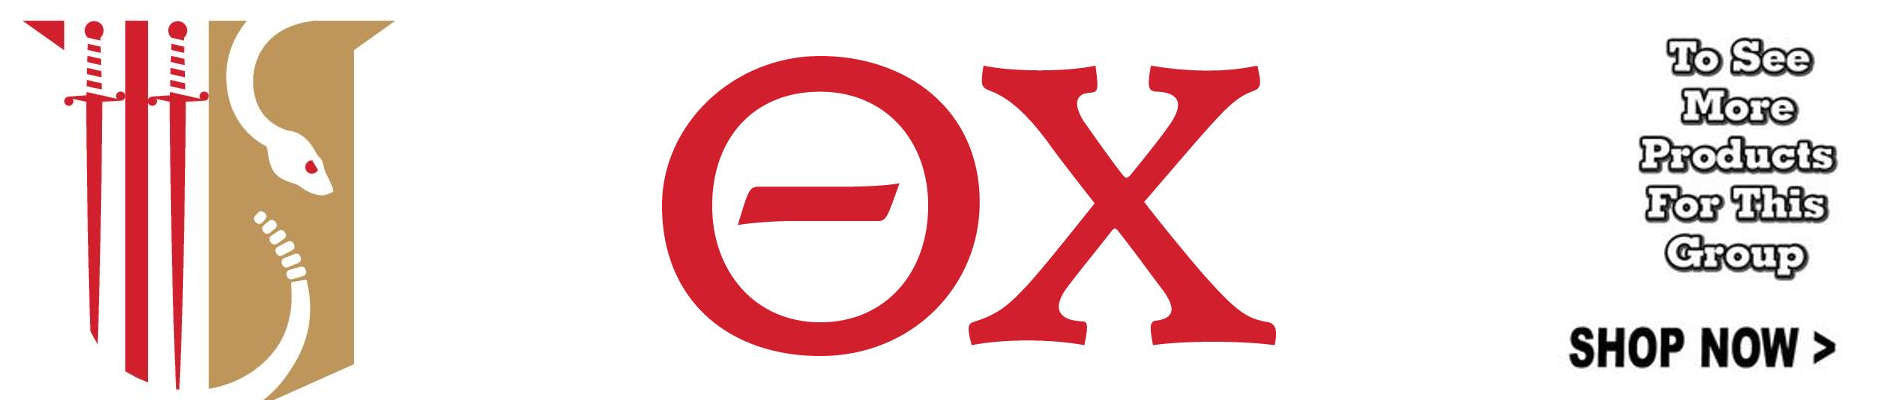 Shop all Theta Chi Products